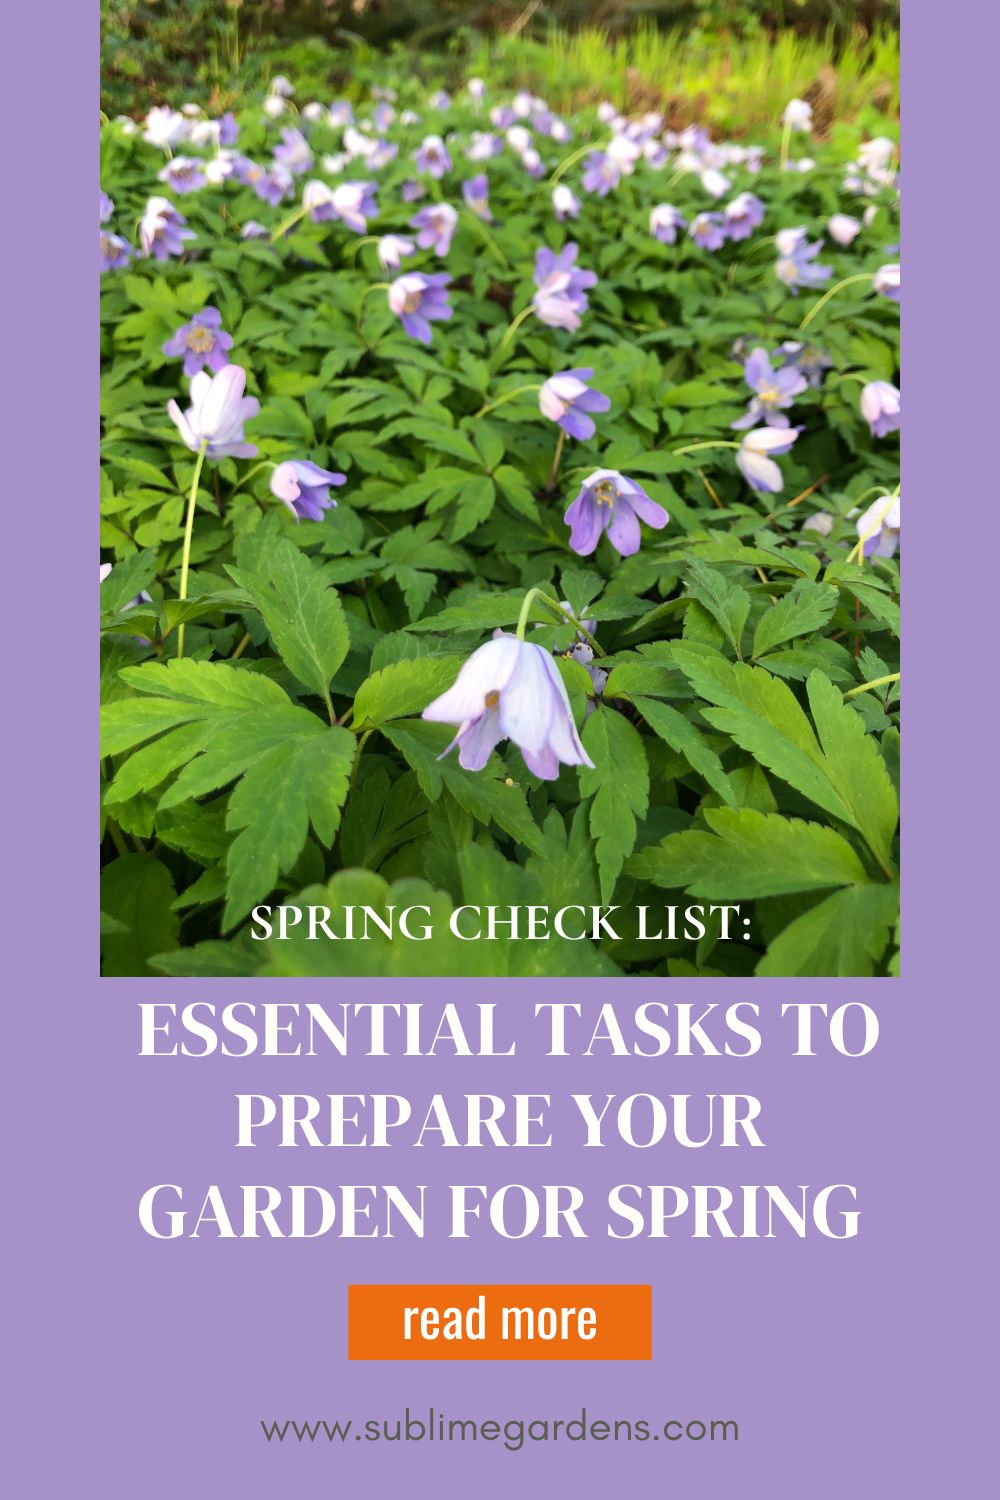 Essential Tasks to Prepare Your Garden for Spring